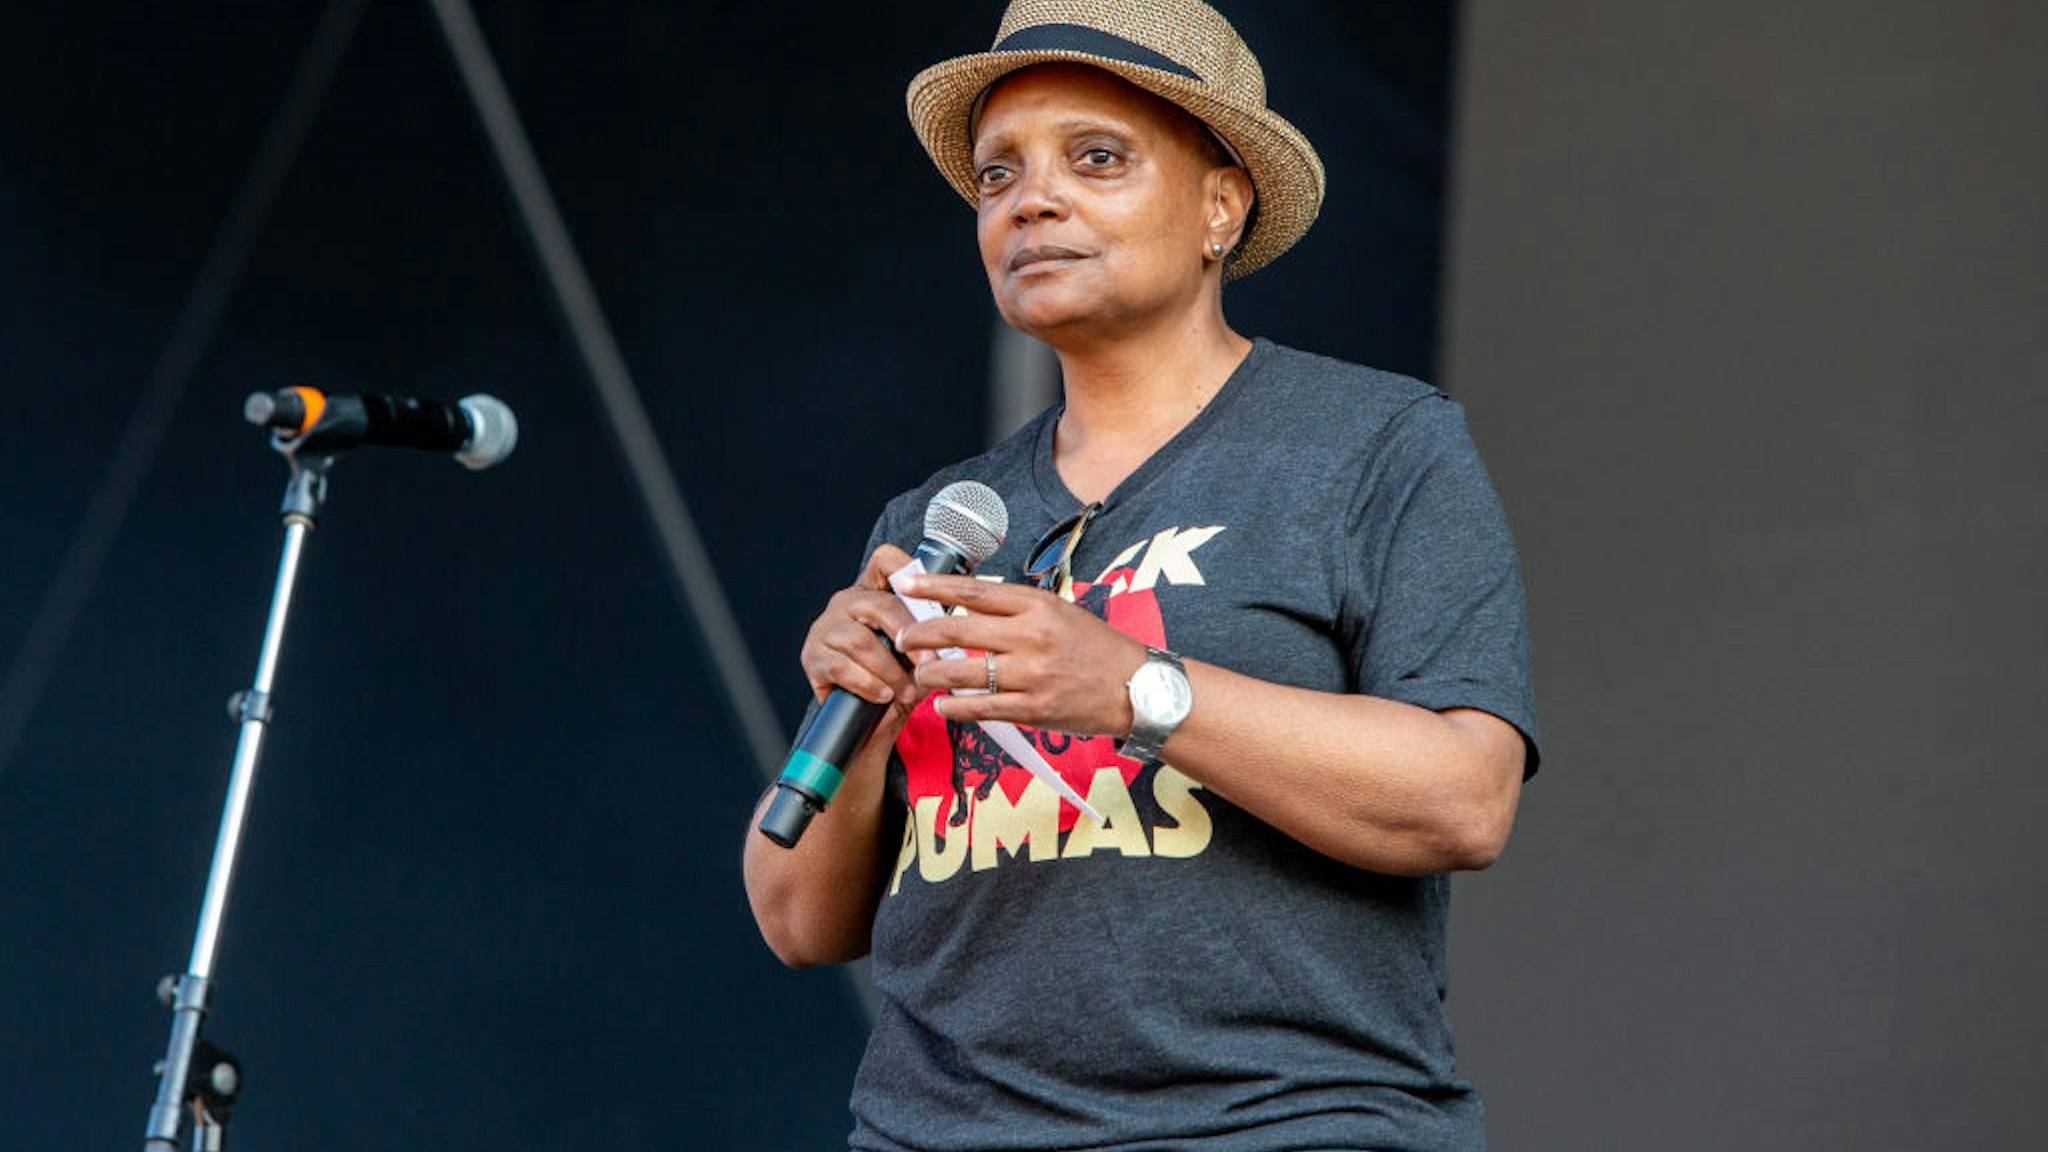 Chicago mayor Lori Lightfoot introduce the Black Pumas set at Lollapalooza in Grant Park on July 29, 2021 in Chicago, Illinois.